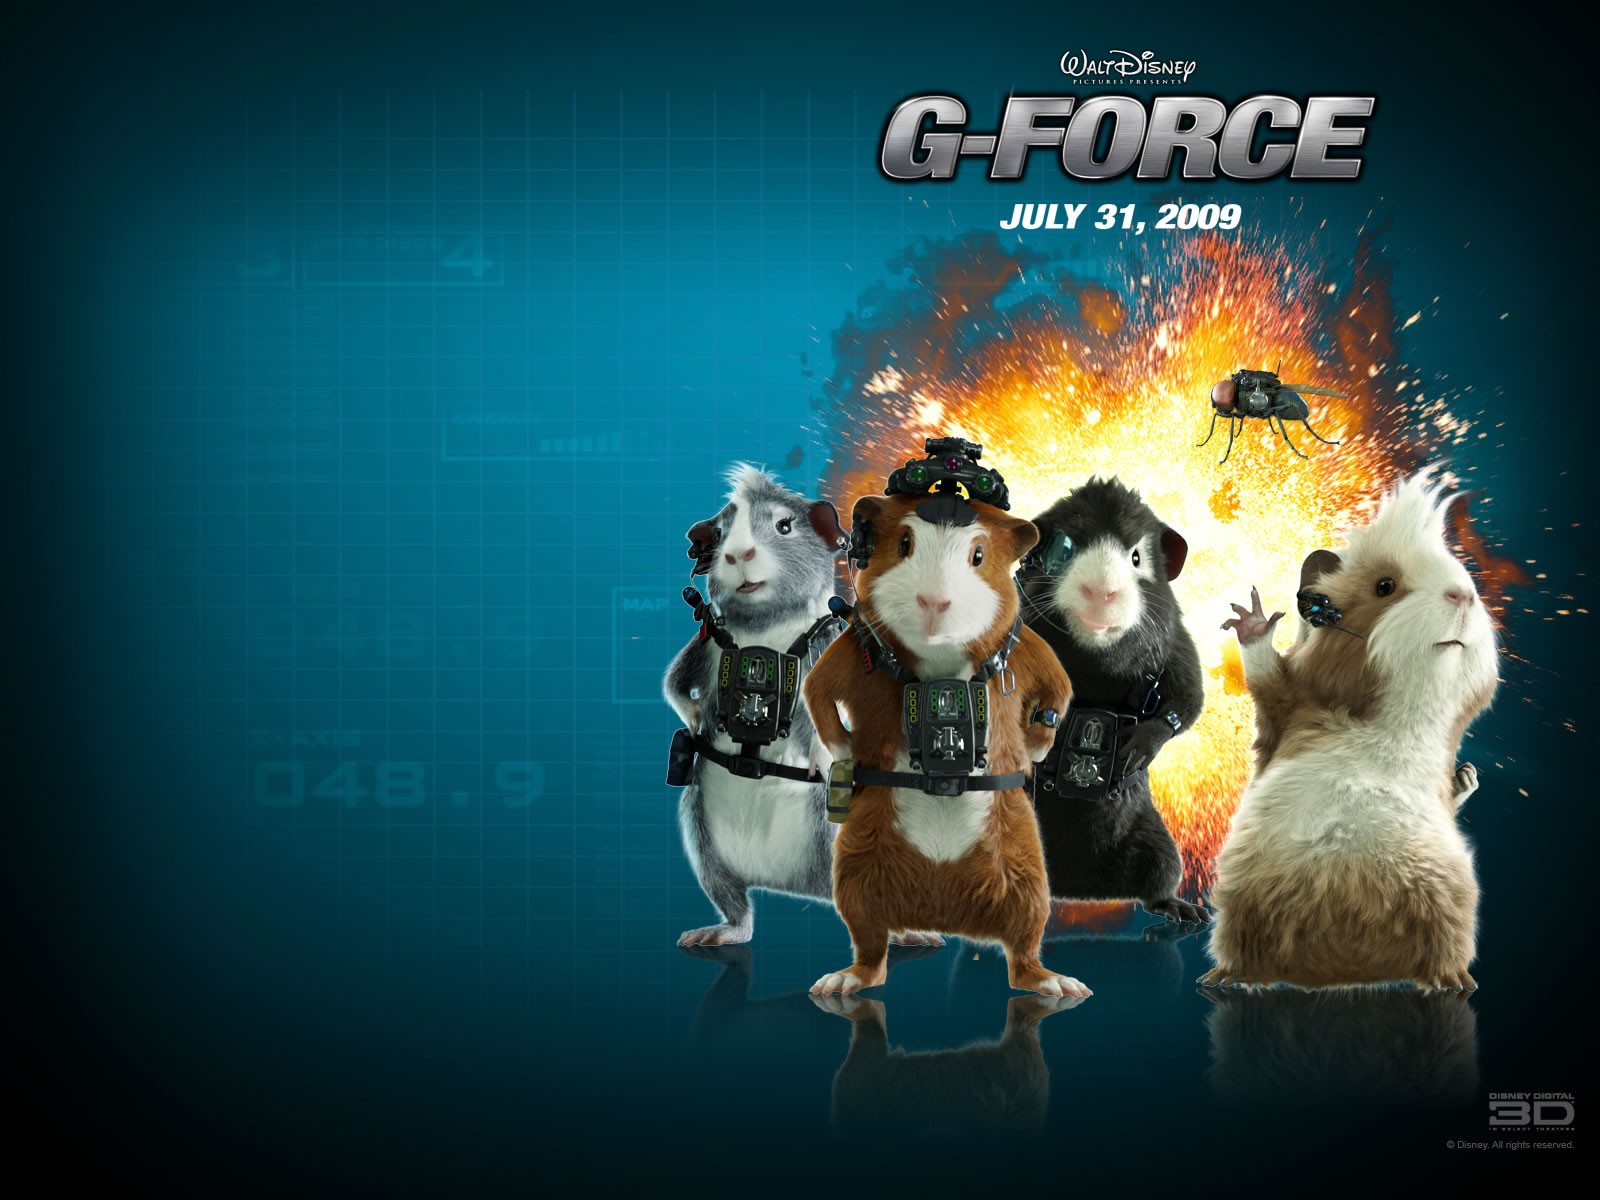 G-FORCE wallpapers - G-Force wallpaper : all the team